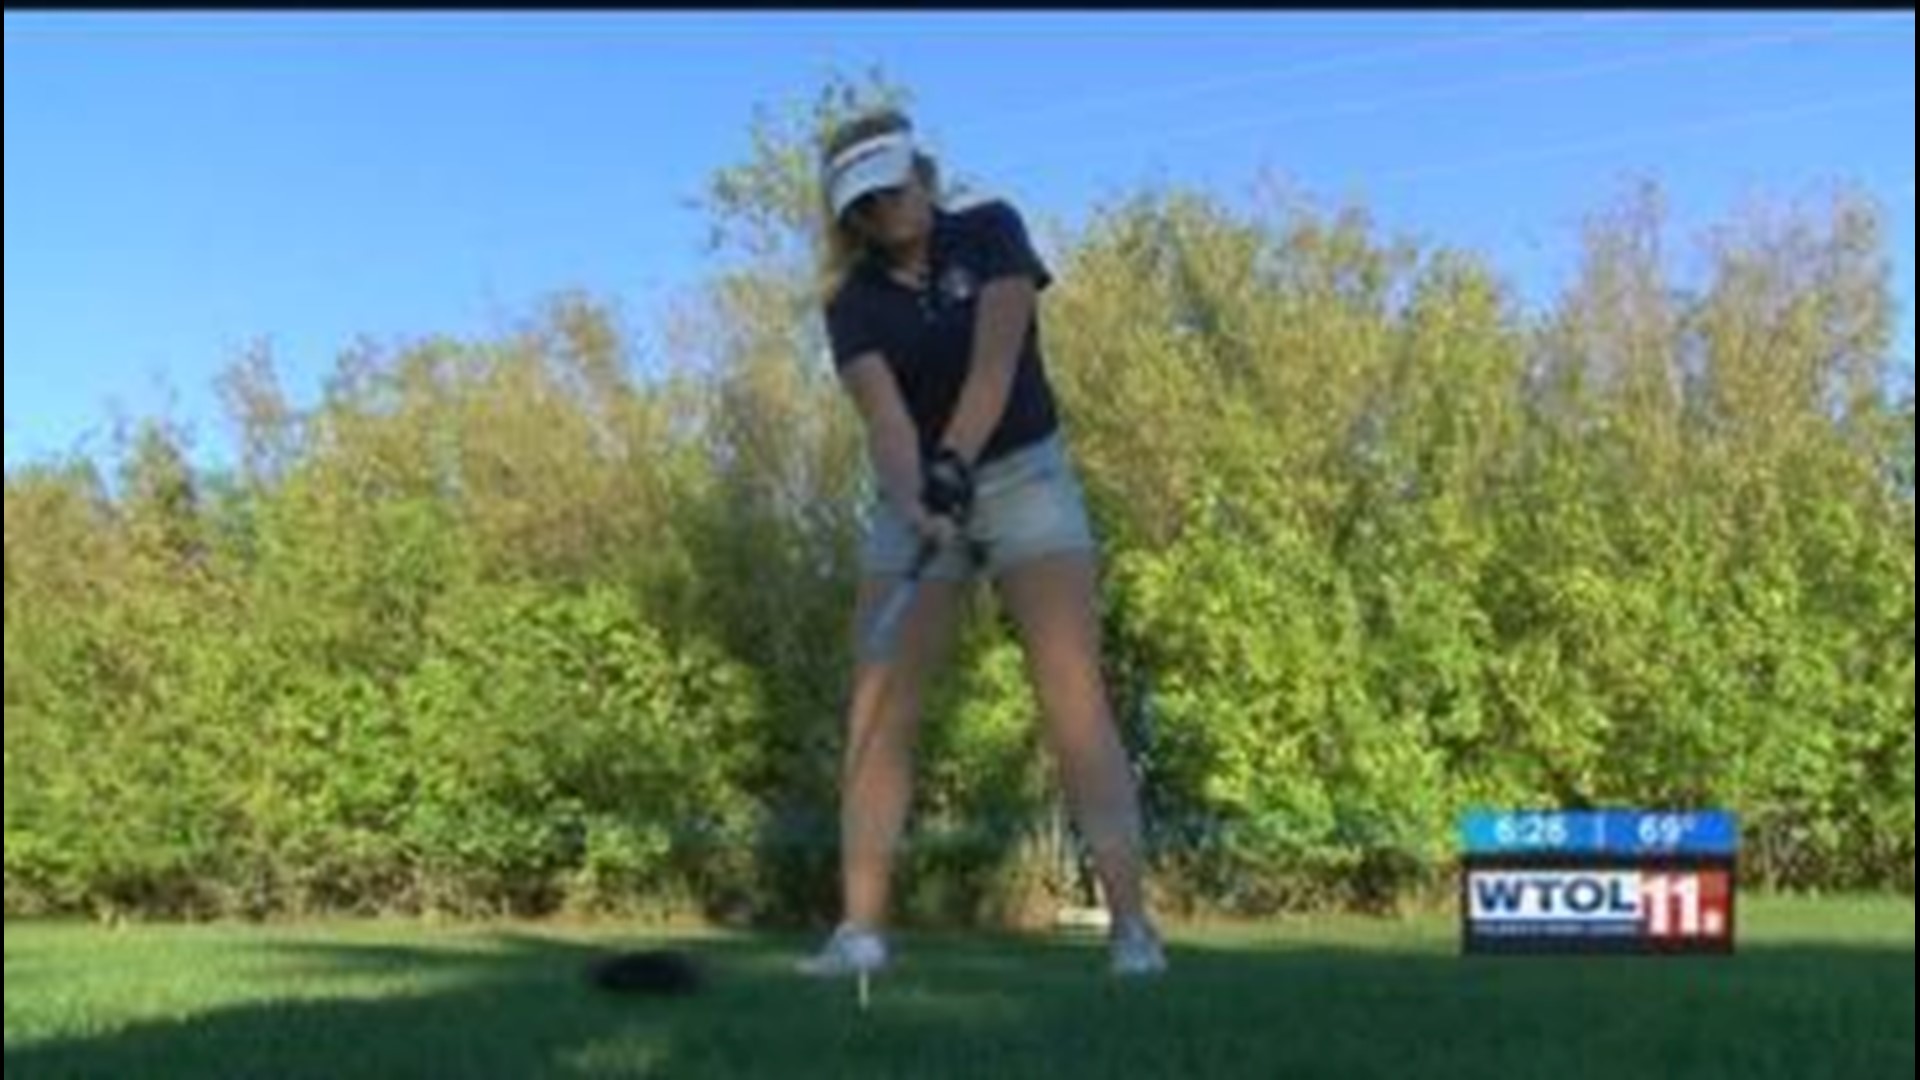 Athlete of the Week: Kyleigh Dull